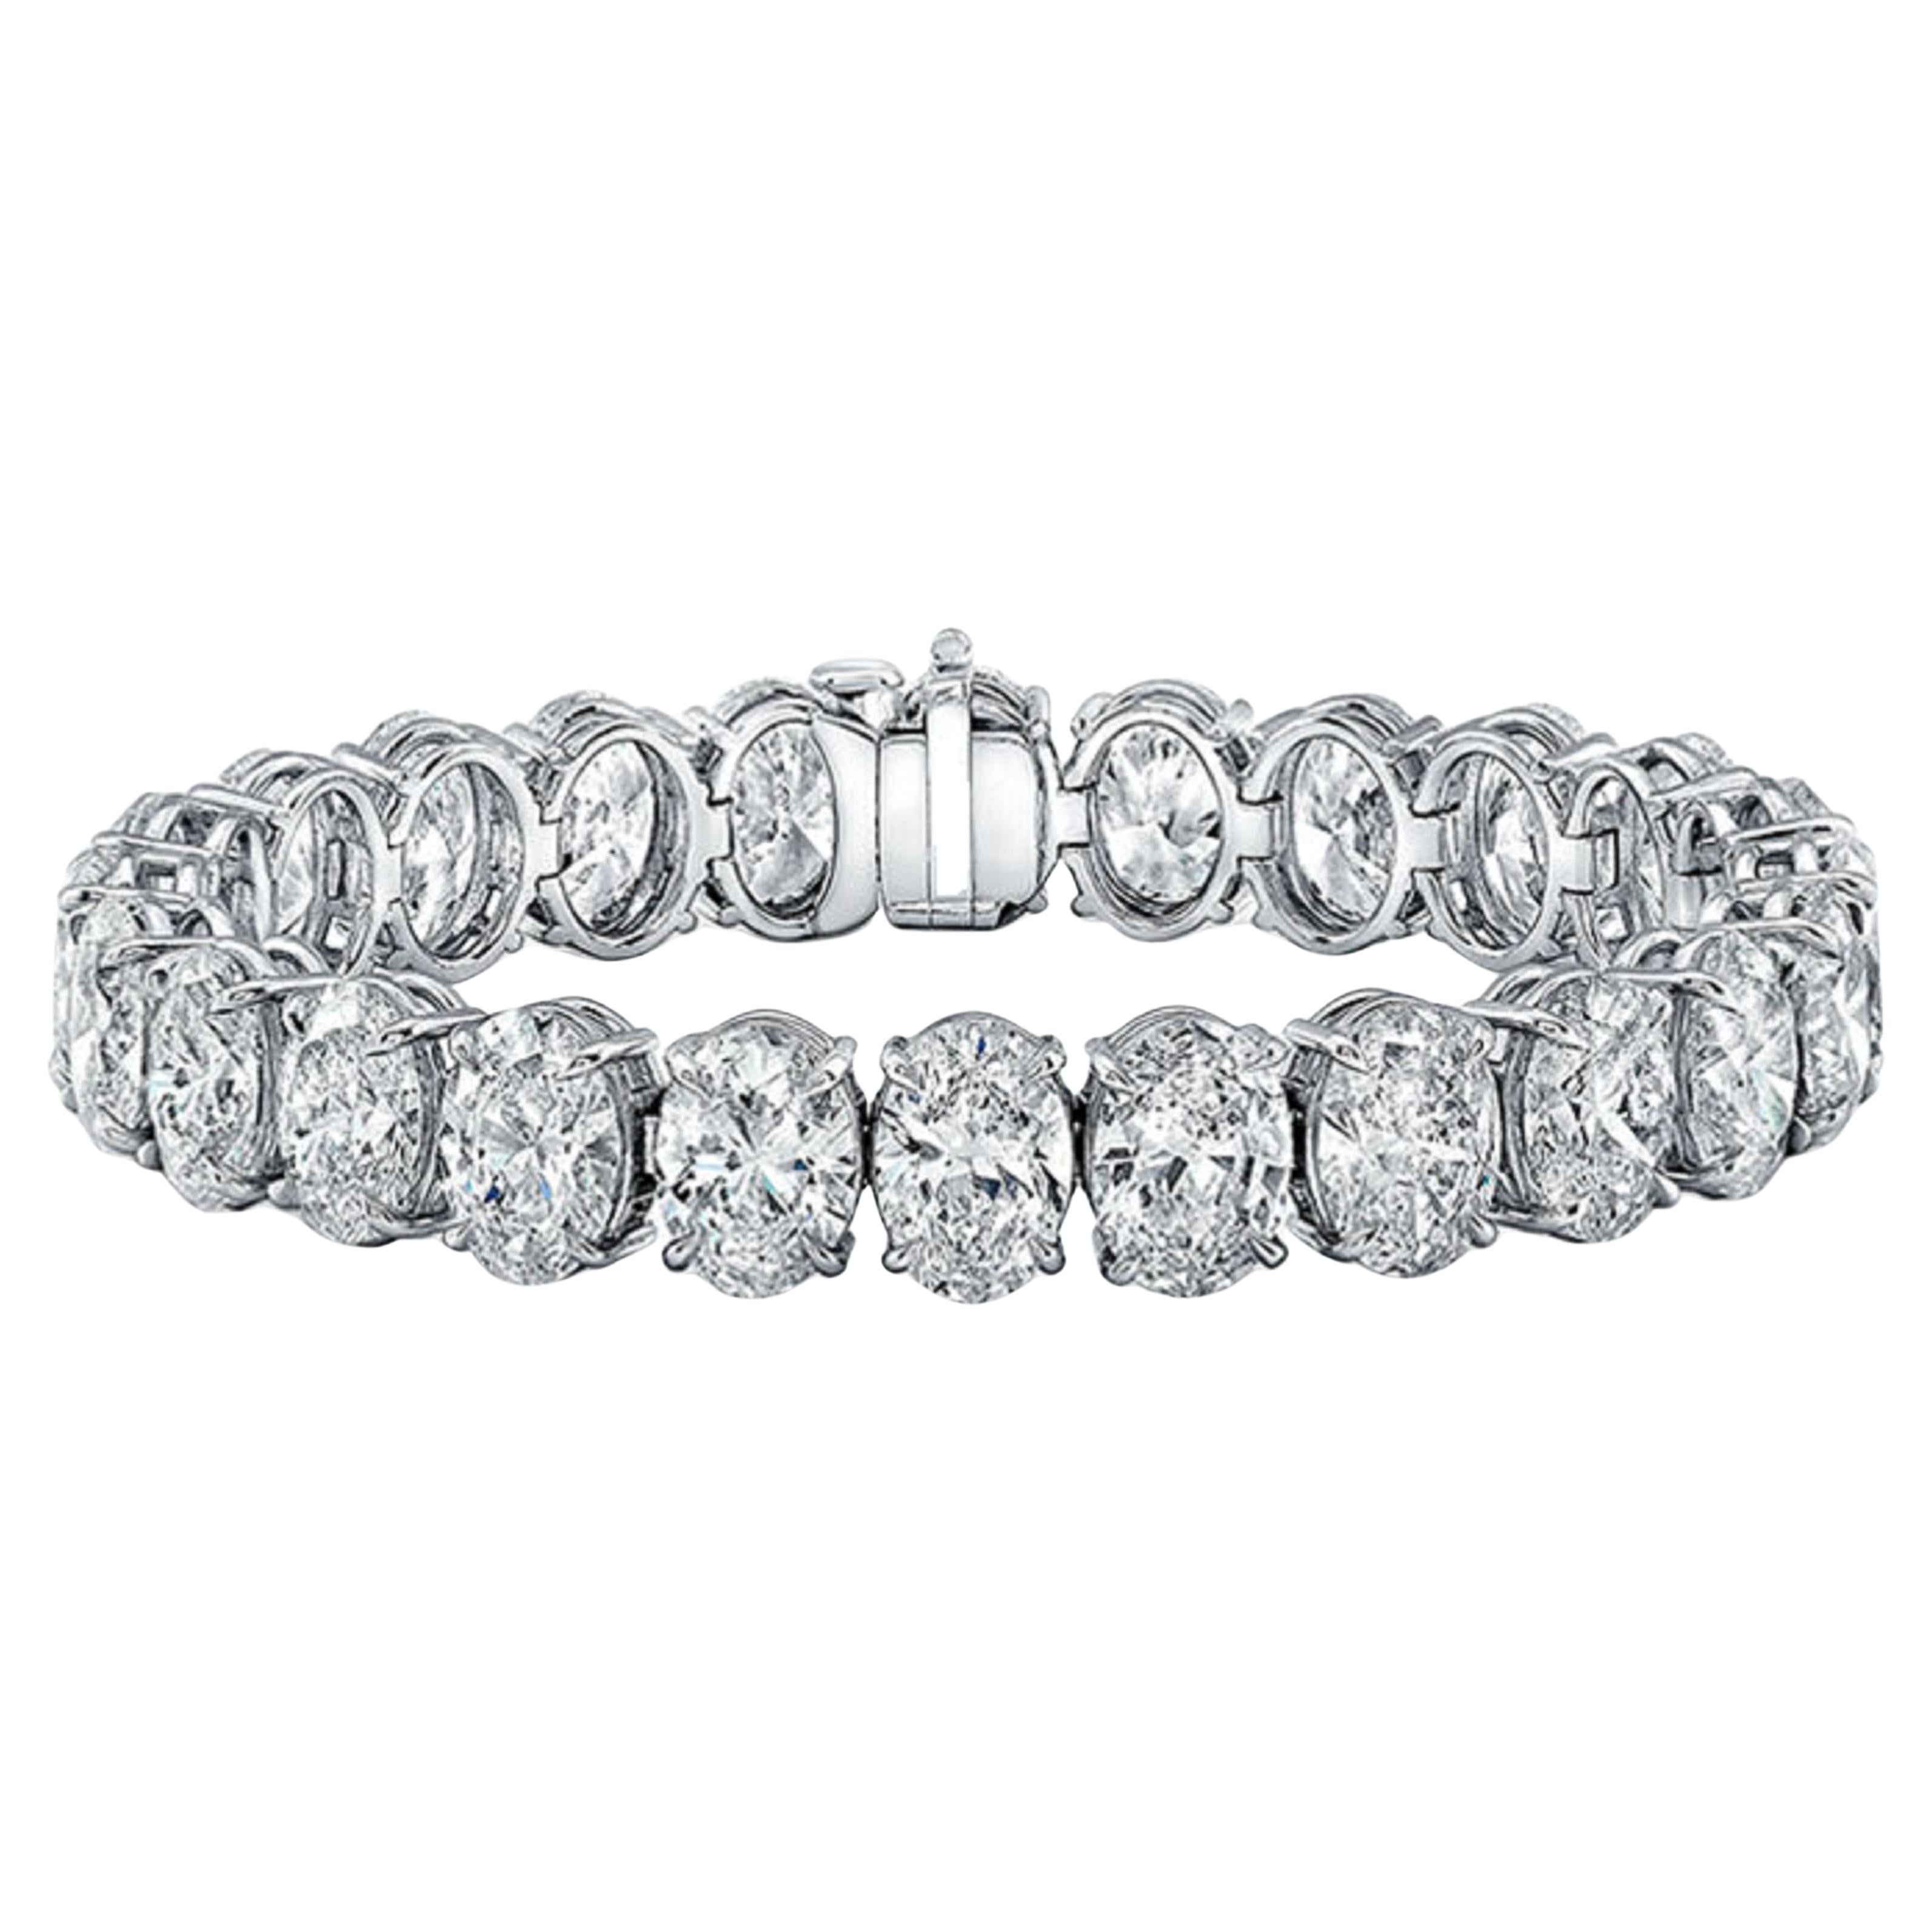 This exquisite bracelet made by Antinori di Sanpietro ROMA features oval cut diamonds weighing an astounding 19 carats total. All stones are very white and perfectly matched.  A very elegant and timeless piece.  
Color of the diamonds is D-F clarity